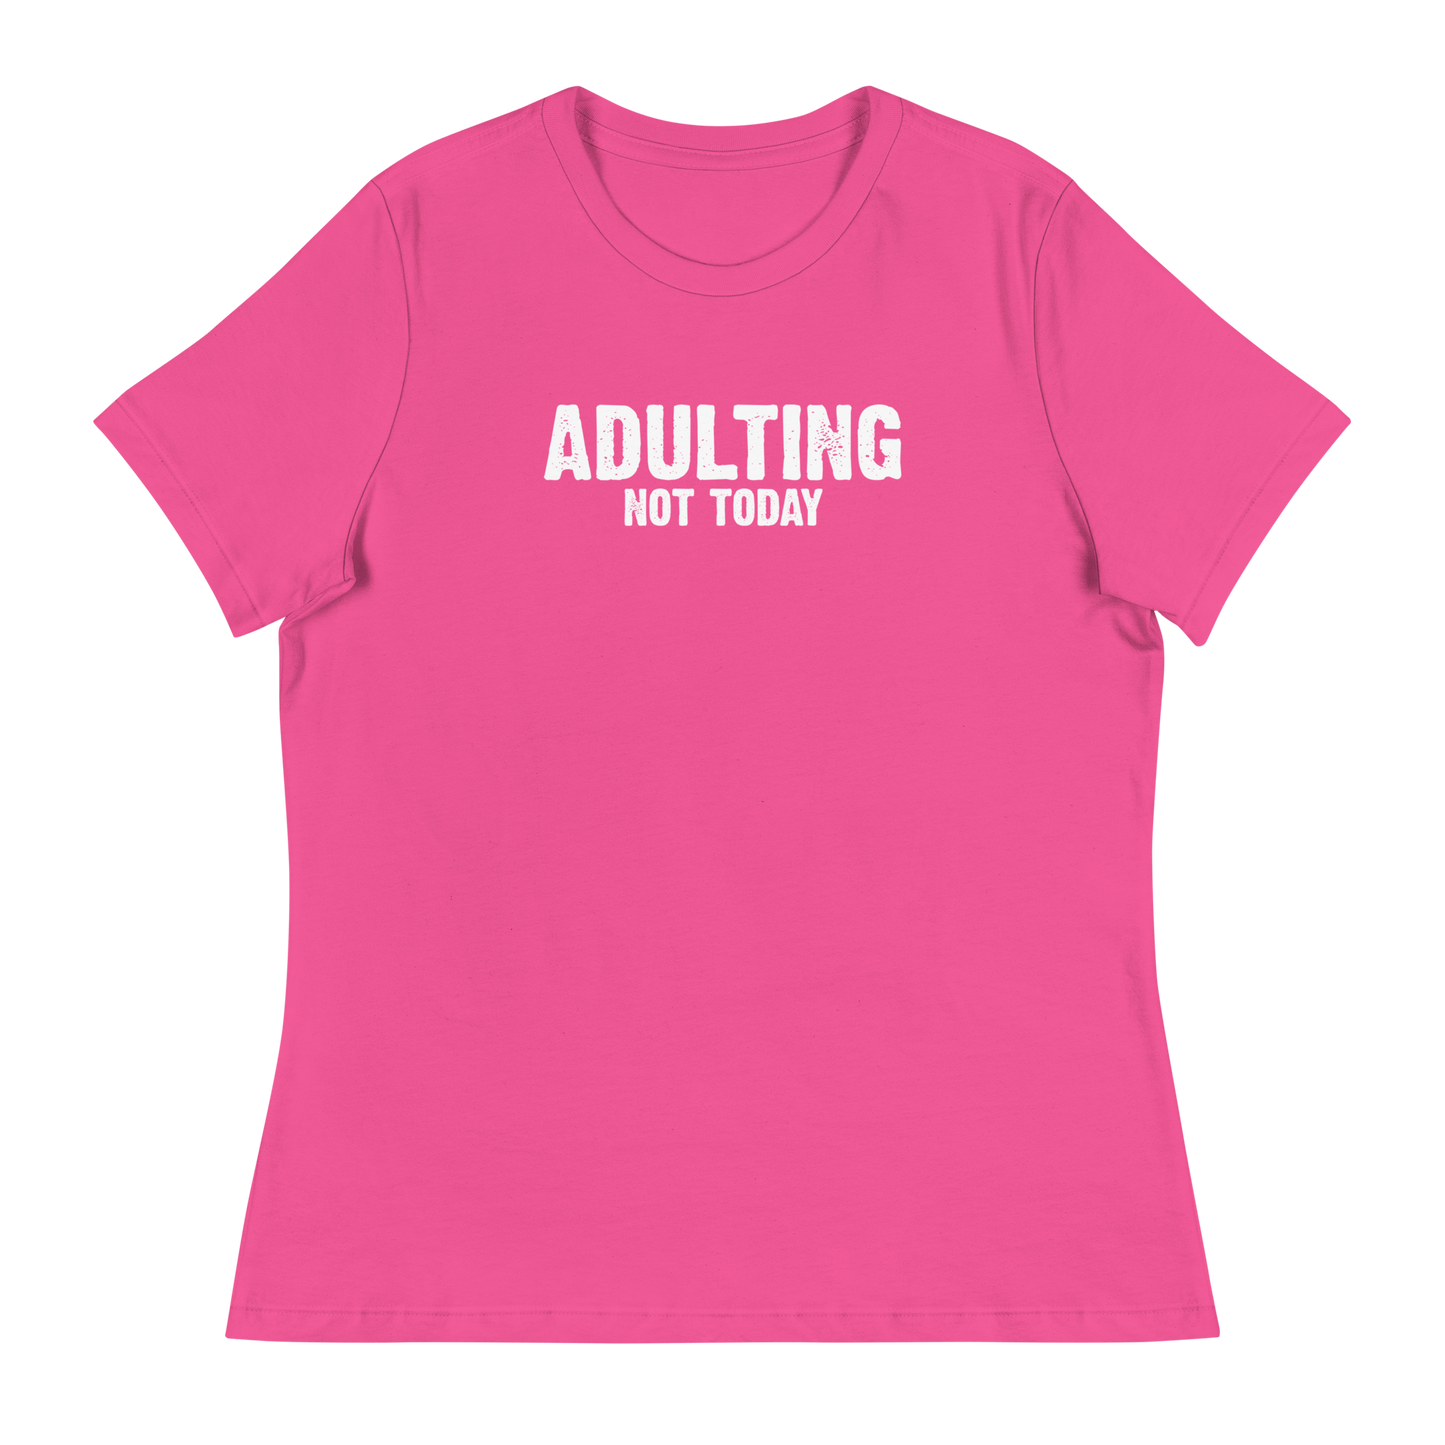 Women's - Adulting, Not Today - Funny T-Shirt